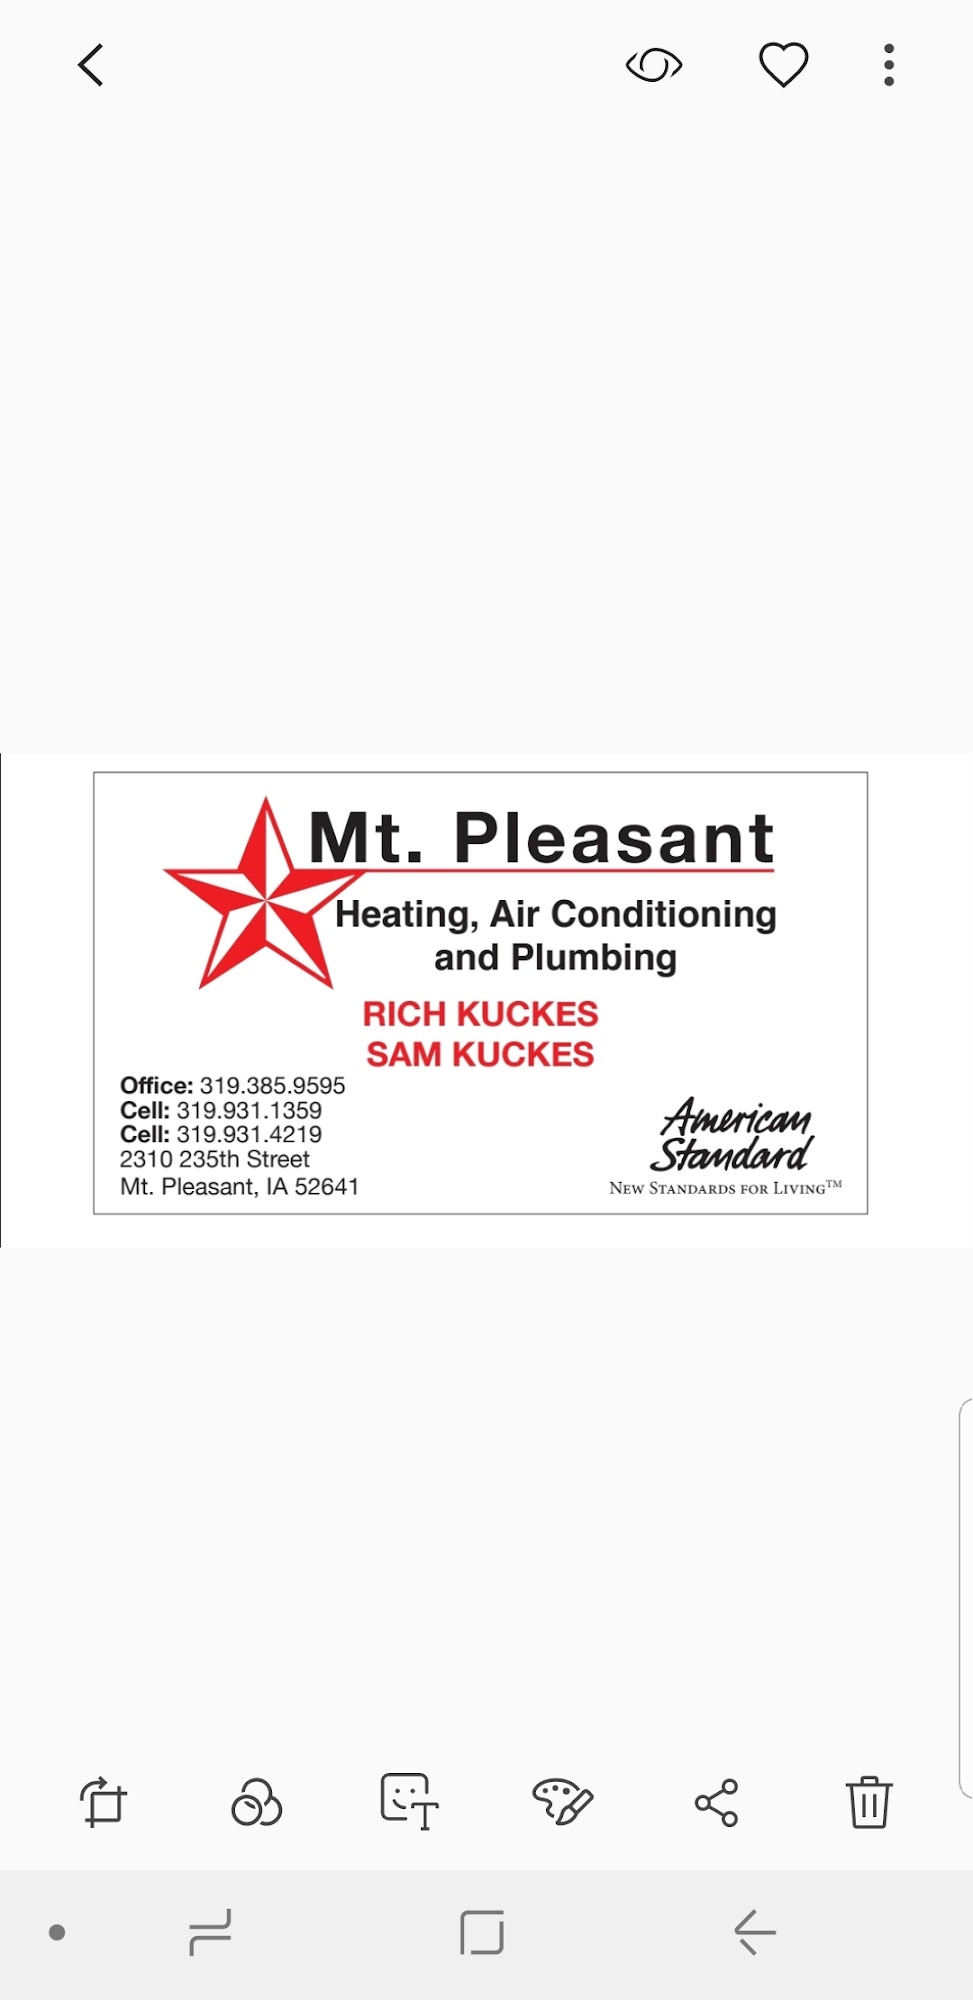 Mt Pleasant Heating Air Conditioning and plumbing. 2310 235th St, Mt Pleasant Iowa 52641